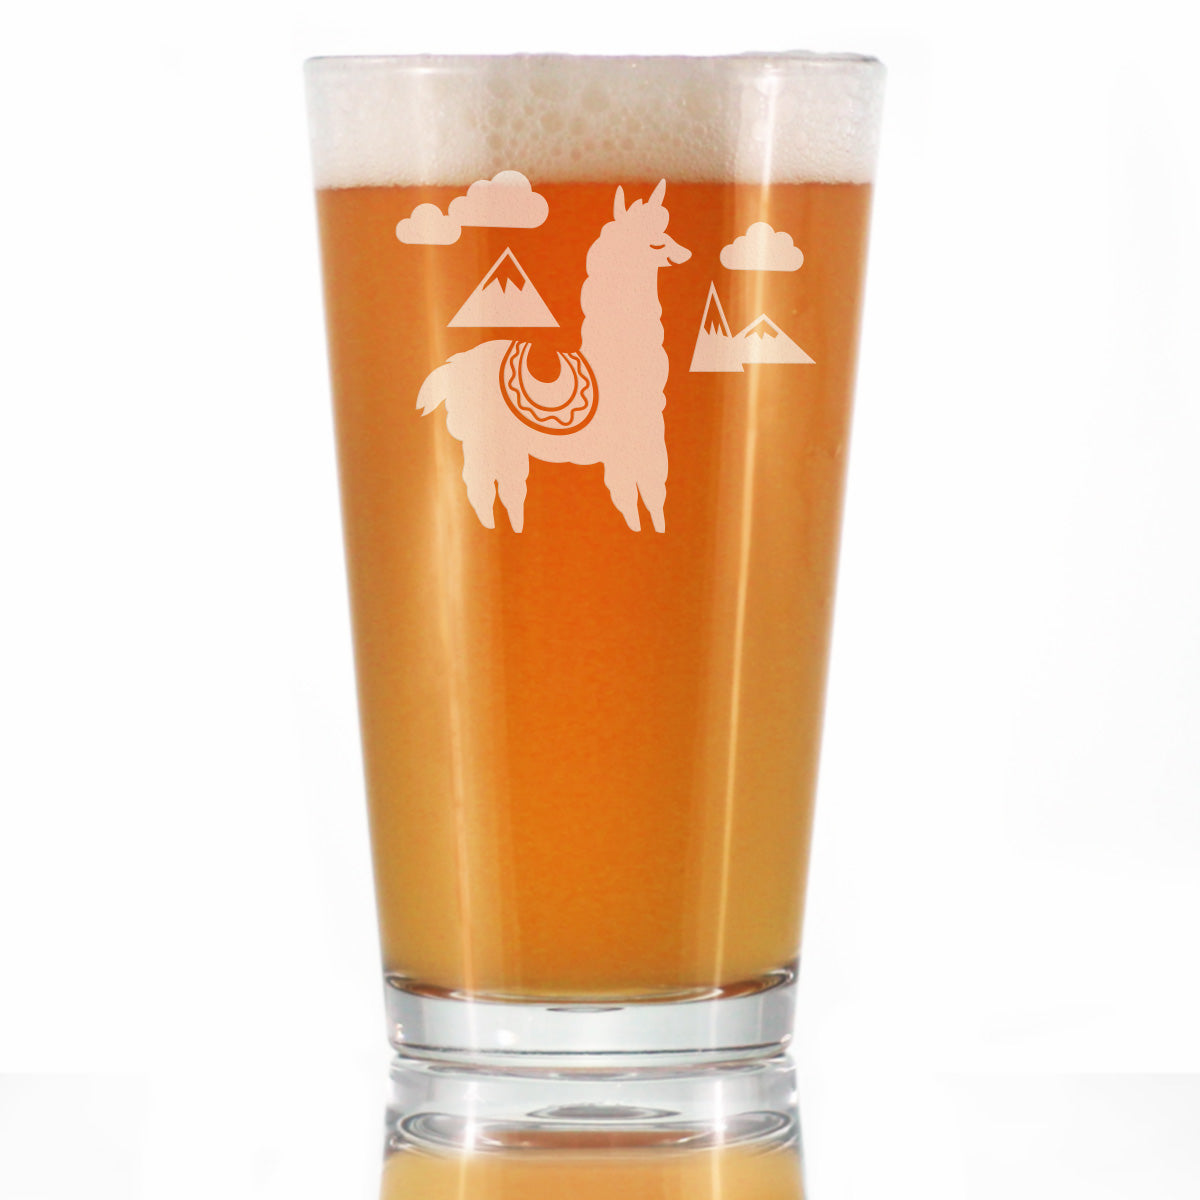 Alpaca Pint Glass for Beer - Unique Funny Farm Animal Themed Decor and Gifts for Alpaca Lovers - 16 oz